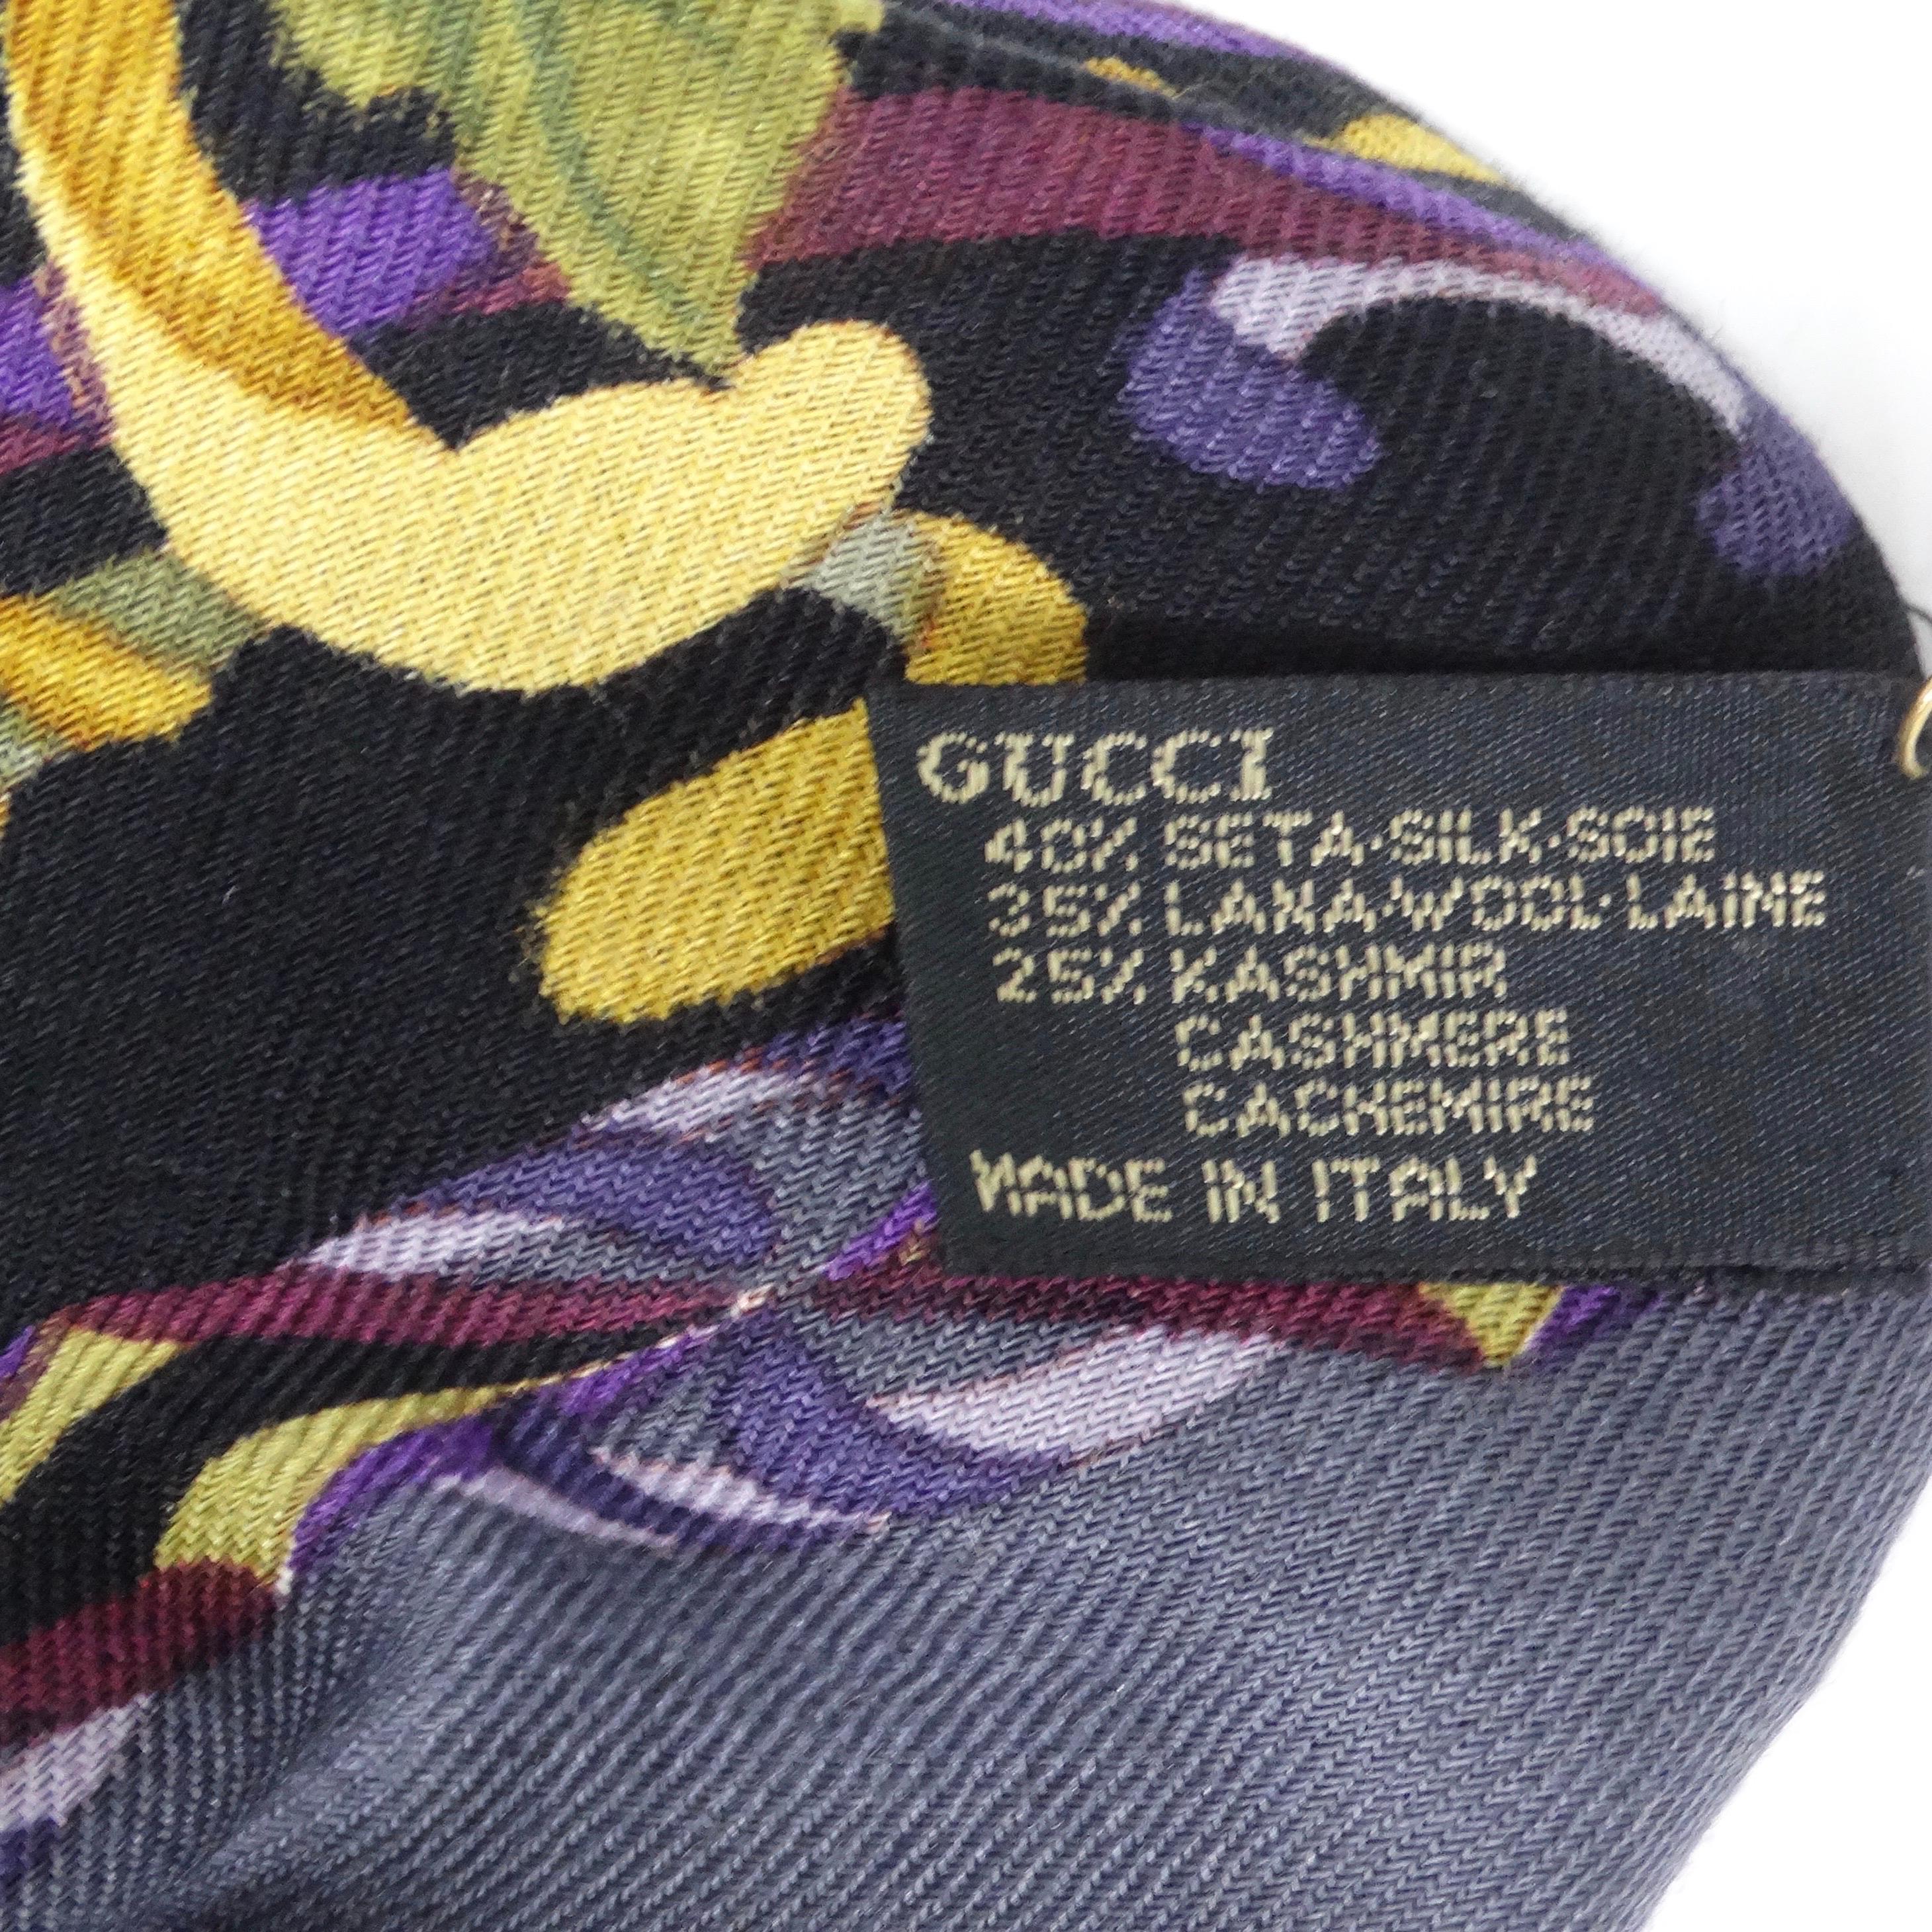 1990s Gucci Floral Printed Scarf In Good Condition For Sale In Scottsdale, AZ